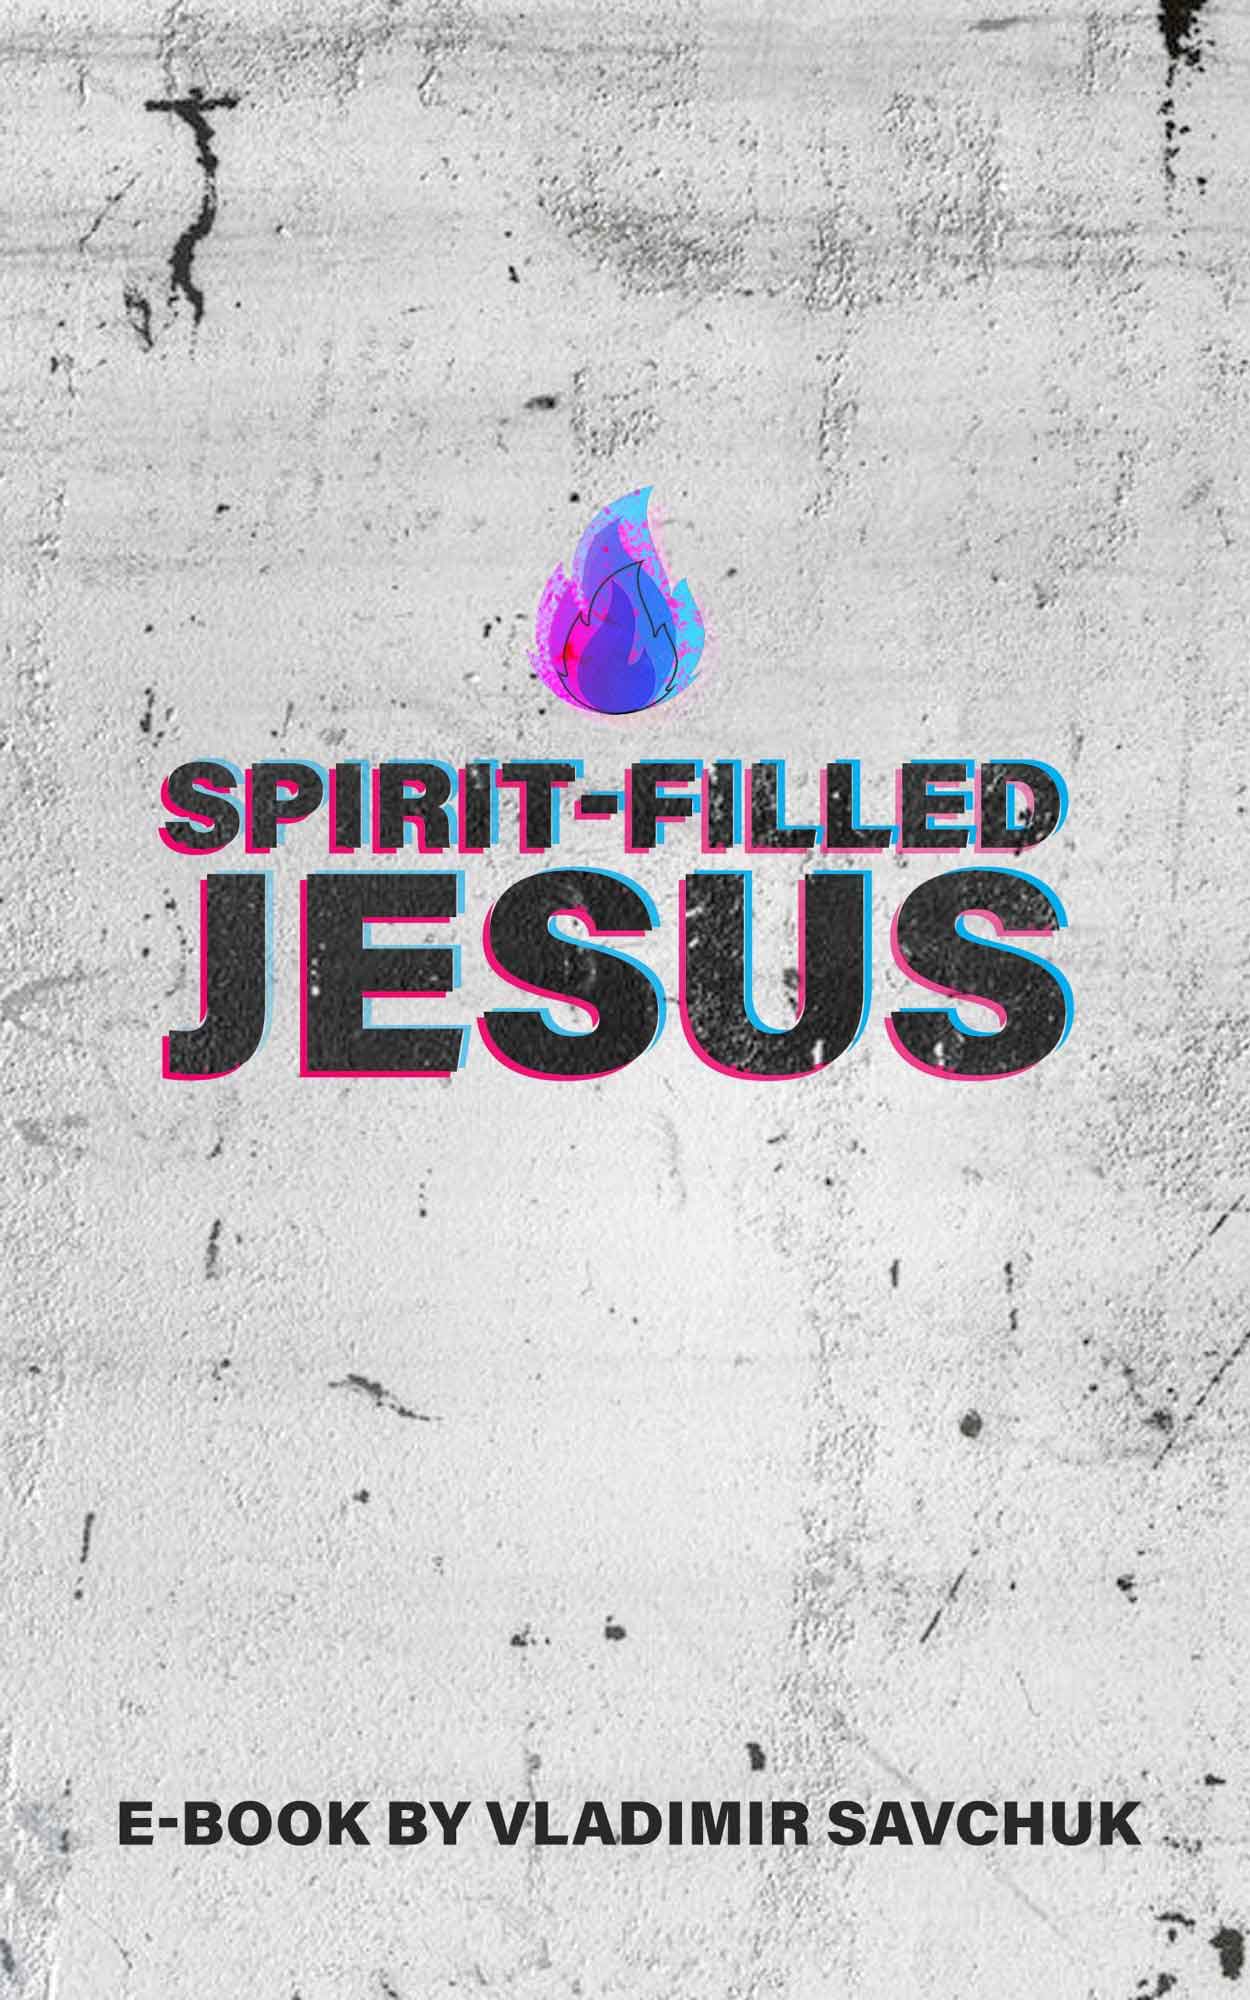 Featured Image for “Spirit-Filled Jesus”